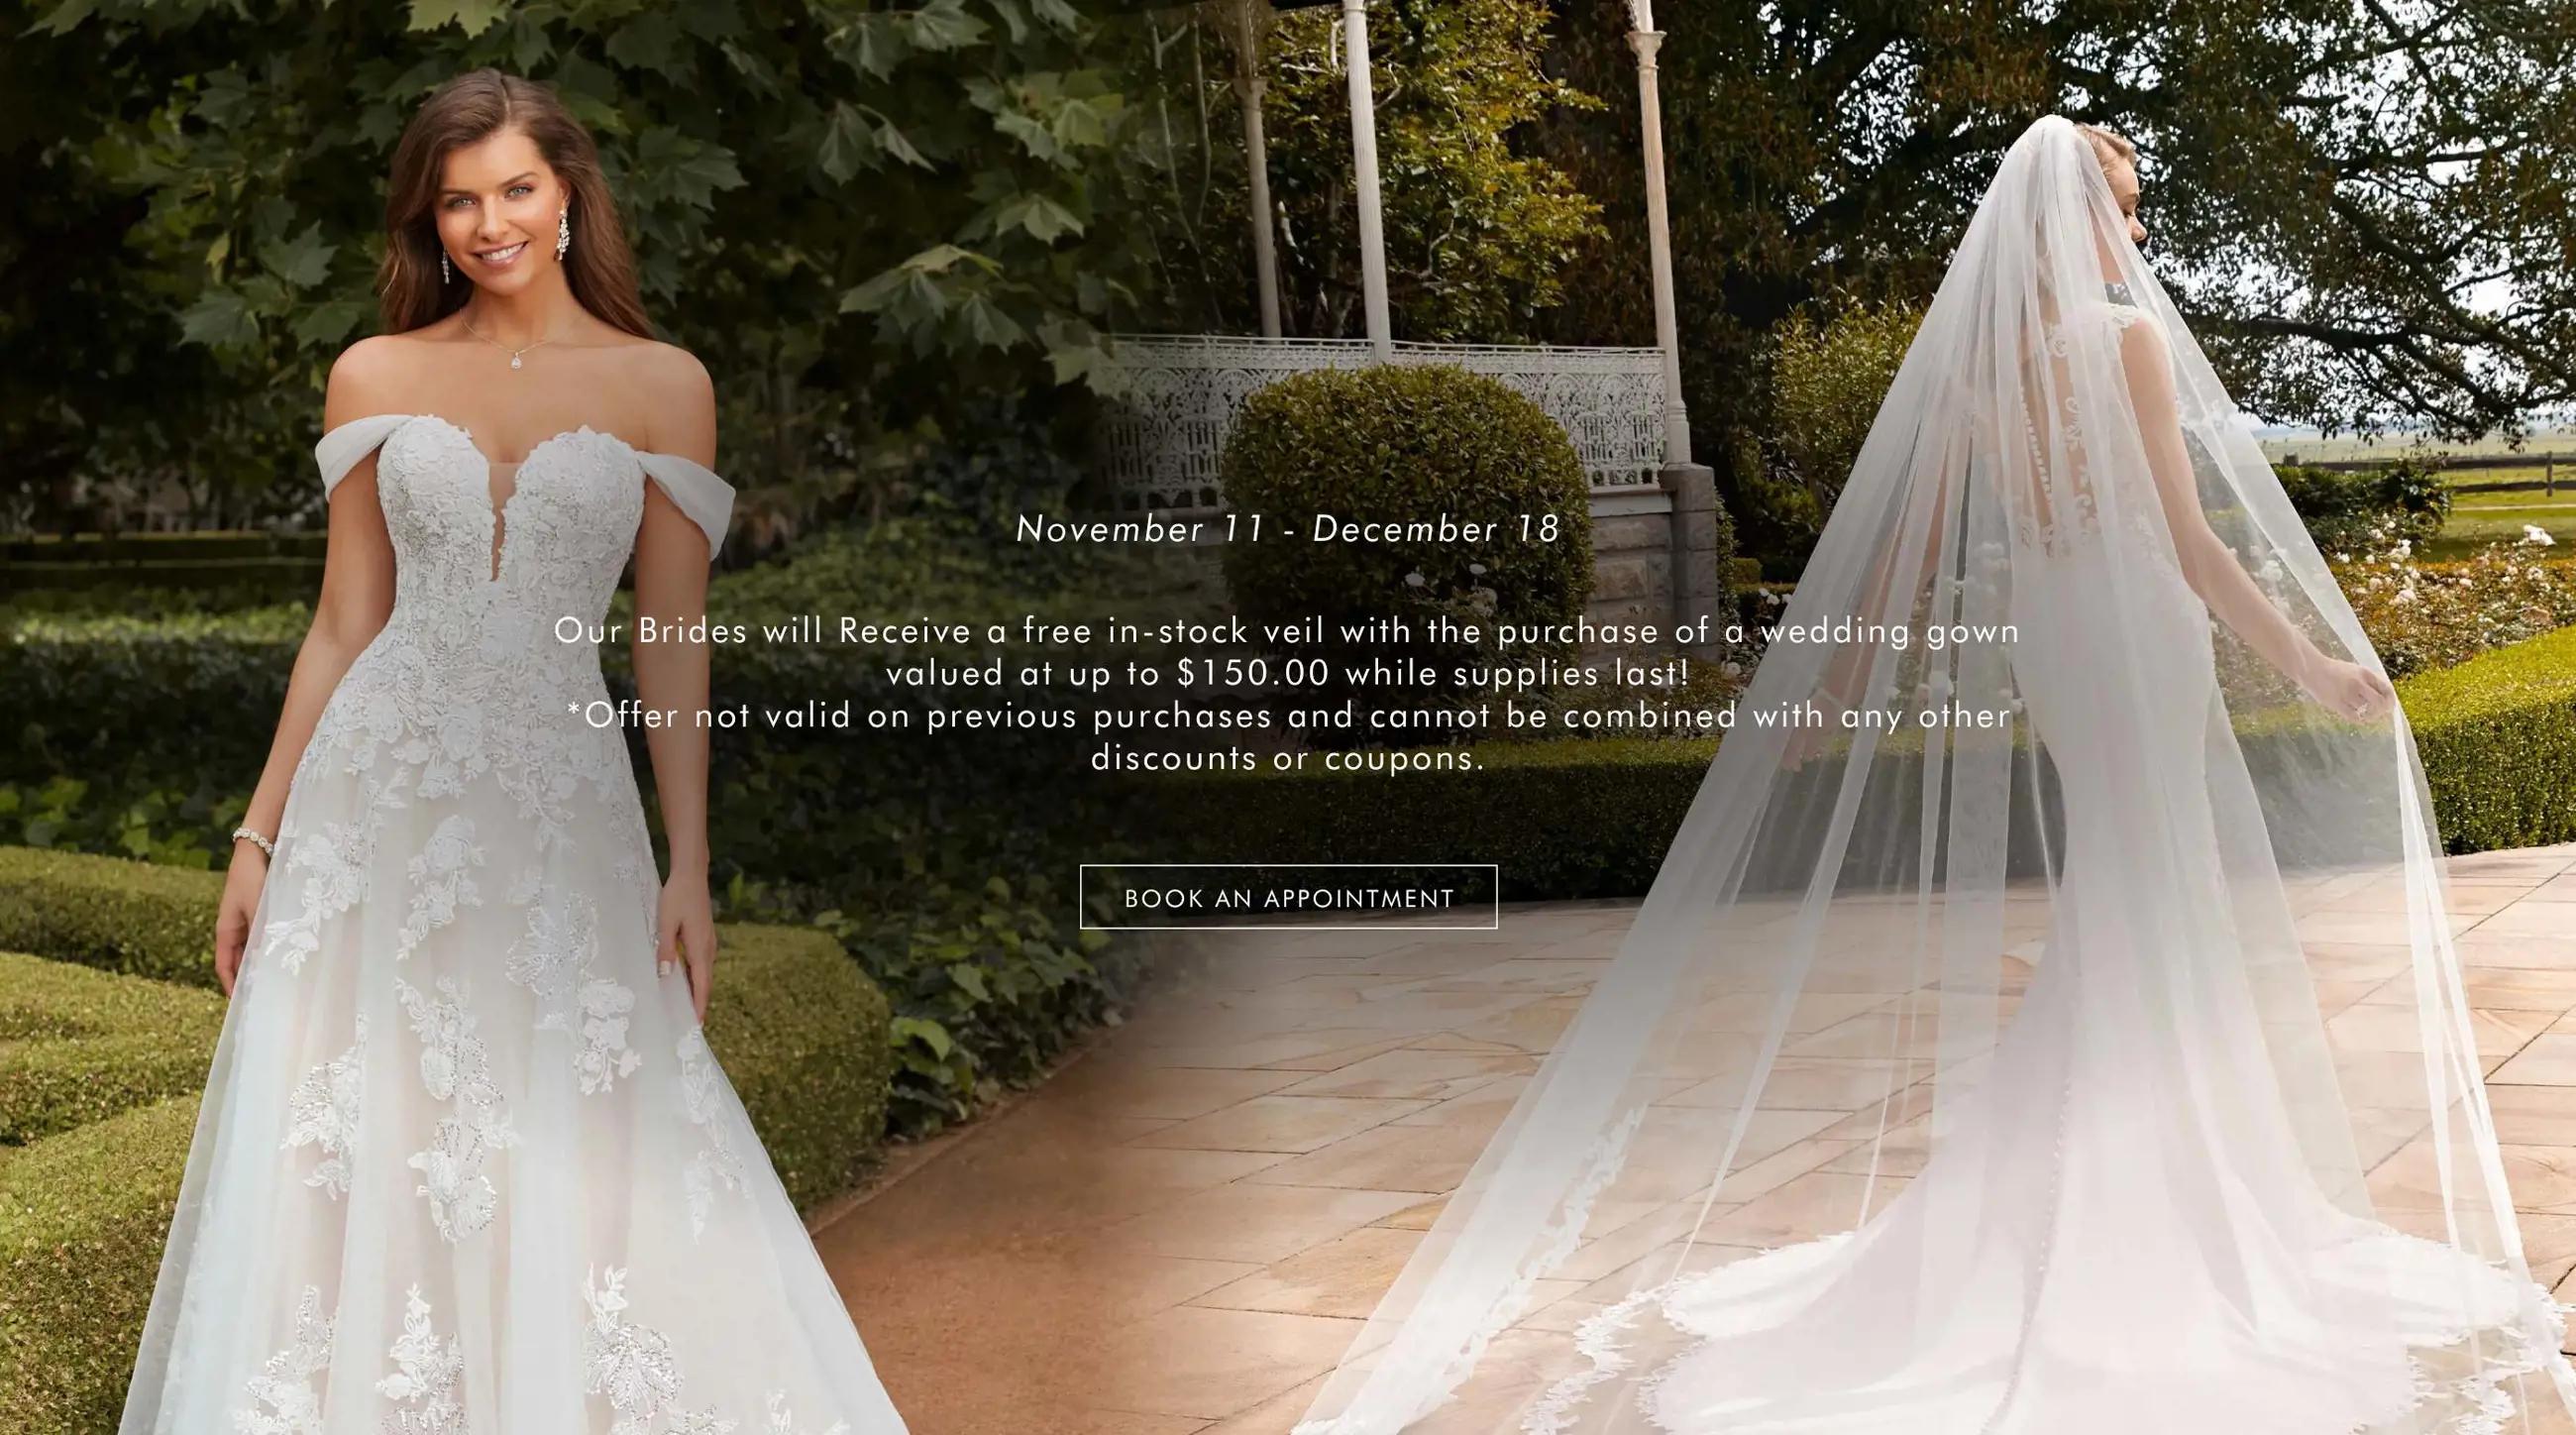 Our Brides will Receive a free in-stock veil with the purchase of a wedding gown valued at up to $150.01 while supplies last! *Offer not valid on previous purchases and cannot be combined with any other discounts or coupons.